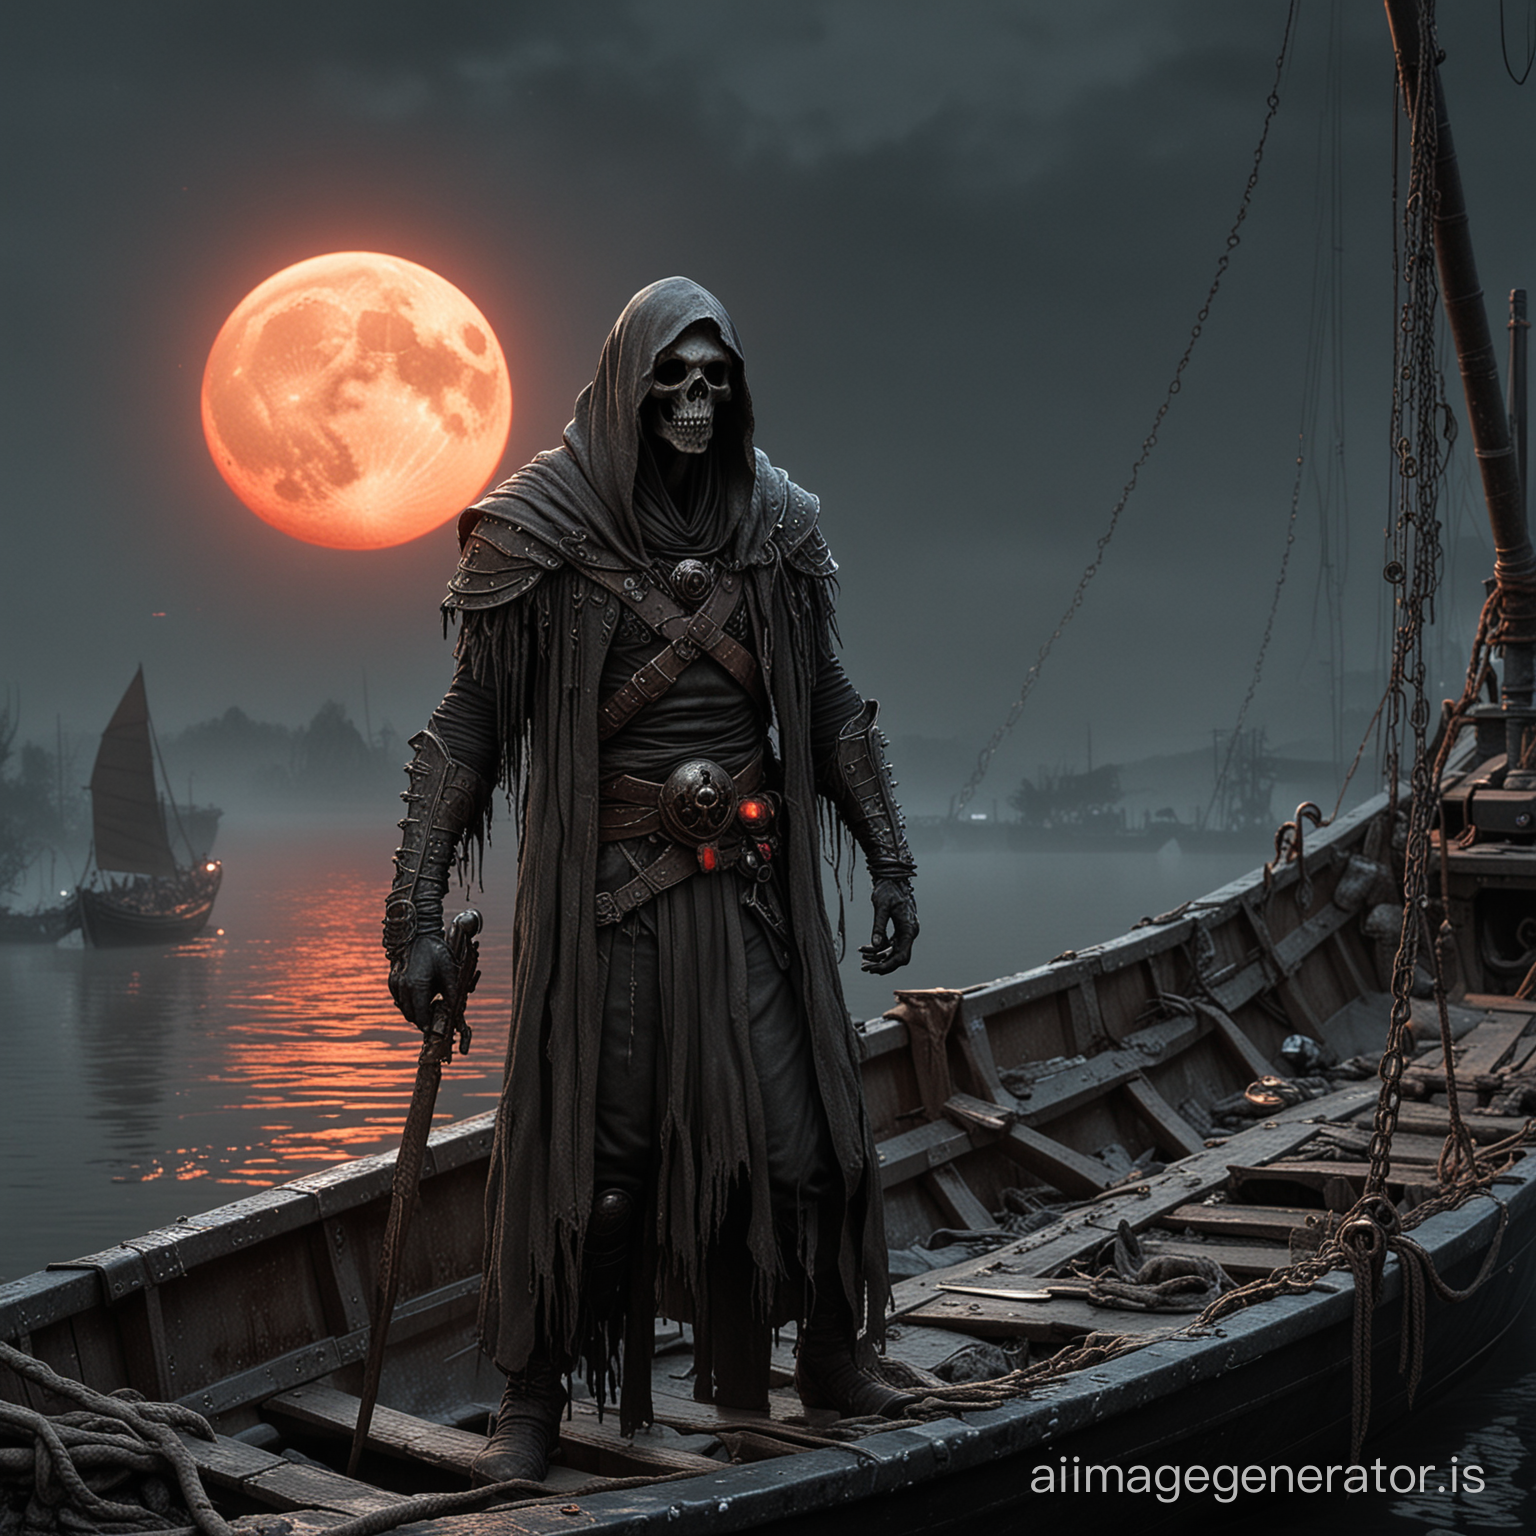 necromancer in ashen rags on a boat, an open pavilion of Charon Cerberus on a boat, necrotics from ash and ash await a ritual on the banks of the River Styx, a curtain of tattered ash bandages, huge necro-guardians are painfully nailed to concrete piers on the river, night moon, palette black black rusty zinc, backlight red moon,
Ray Tracing Global Illumination,Optics, Scattering,Glow,insanely detailed and intricate,superdetailed,Hyper detailed